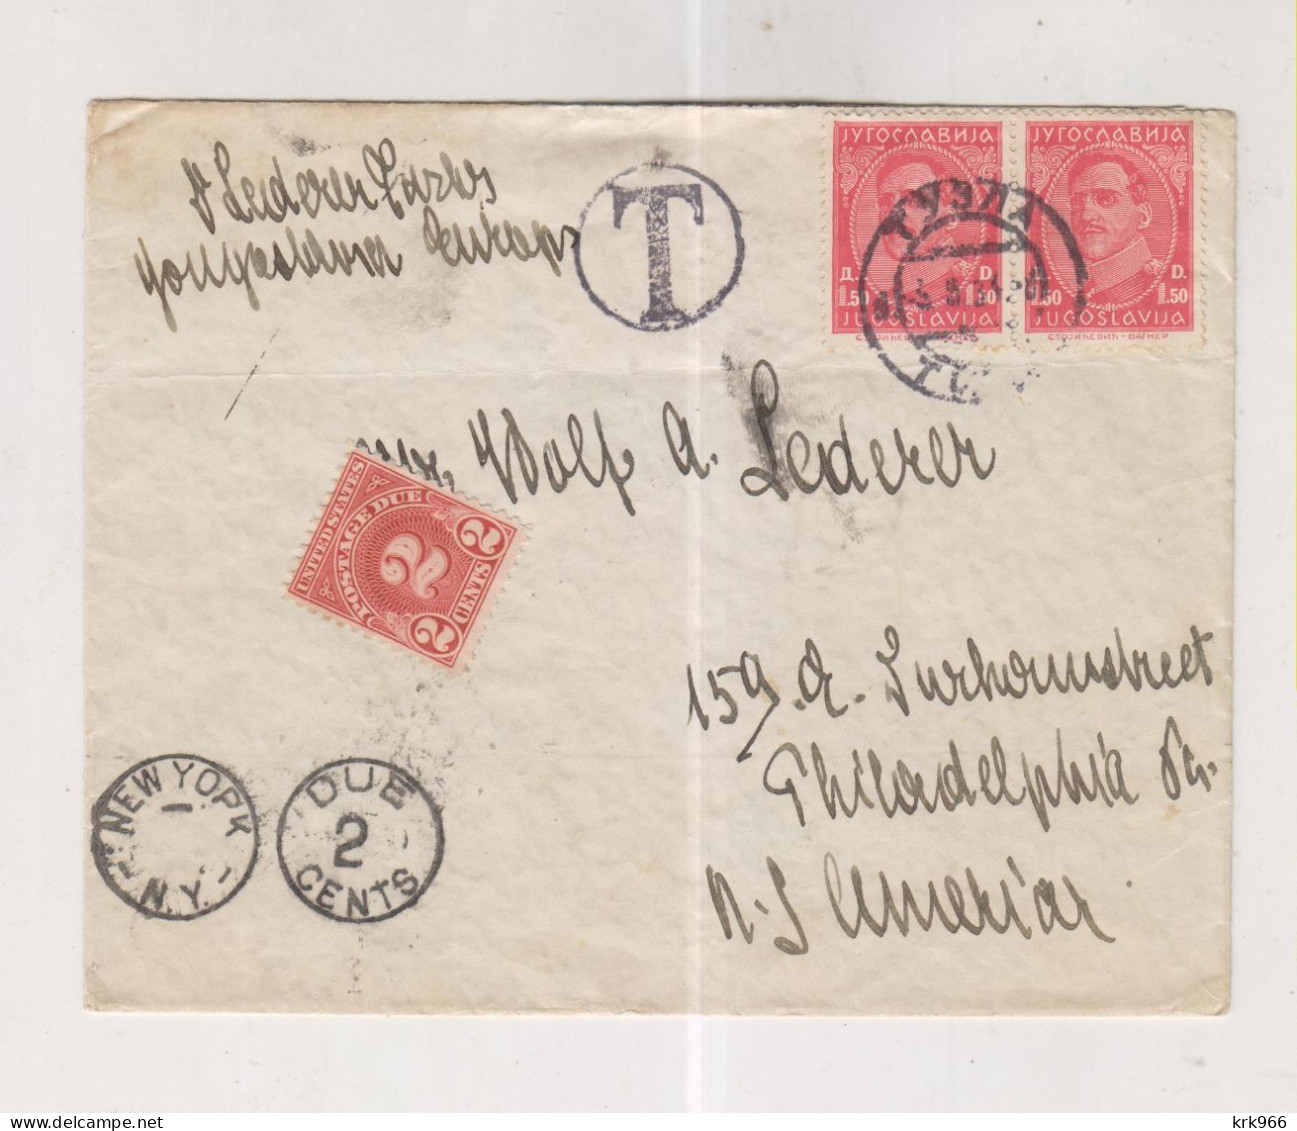 YUGOSLAVIA TUZLA 1934 Nice Cover To United States Postage Due - Covers & Documents